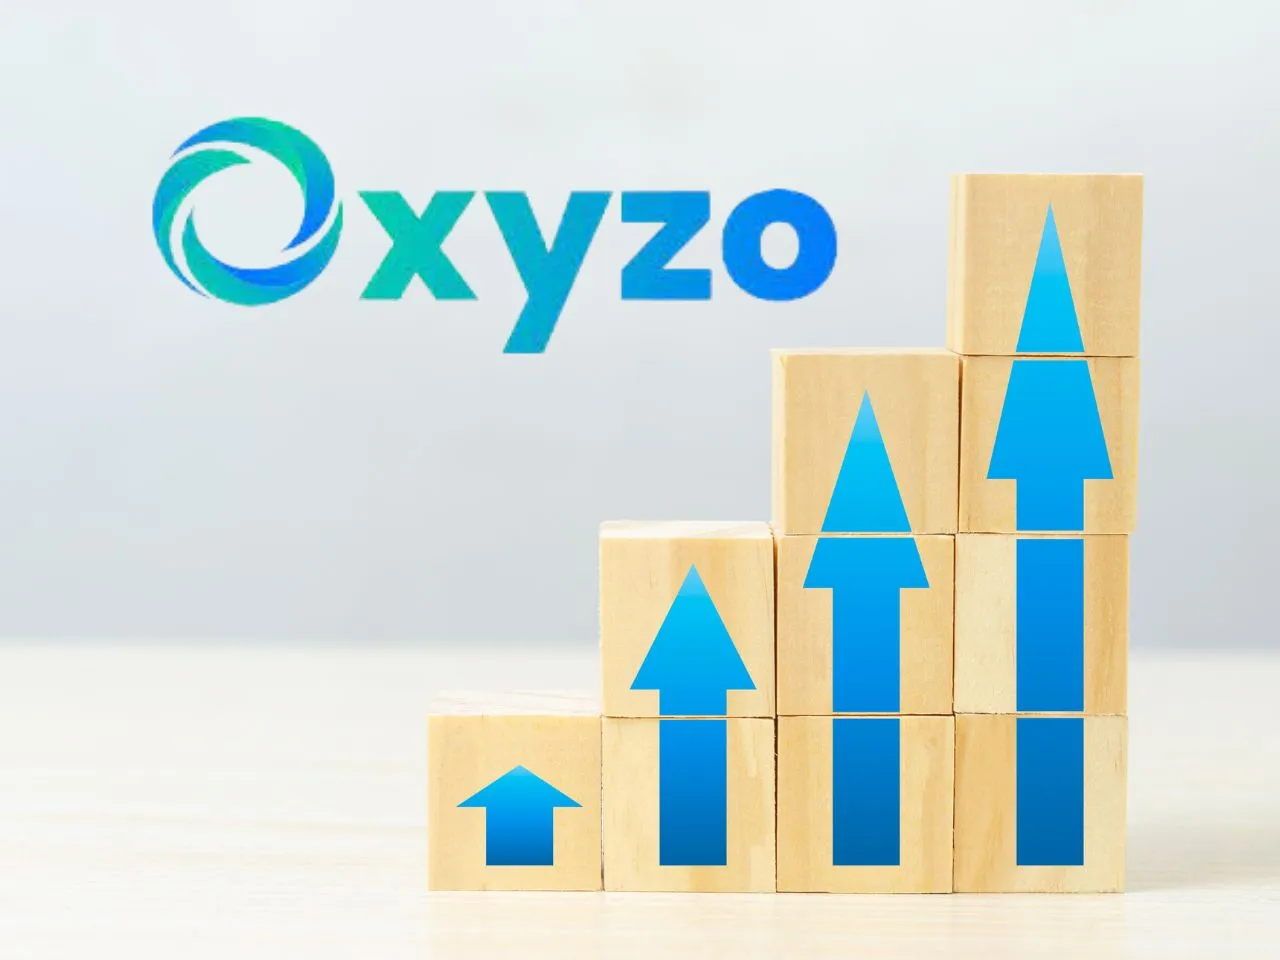 Unicorn Startup Oxyzo Records 185% Surge in Profit After Tax in FY 23